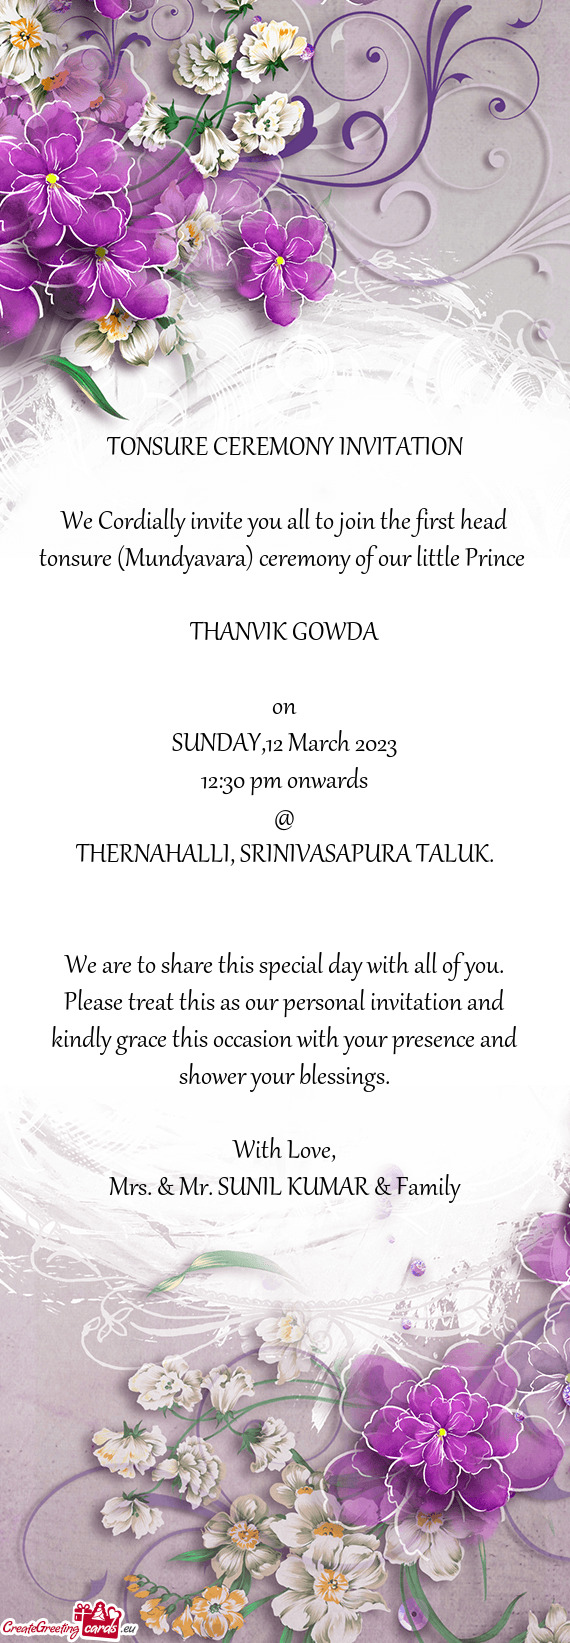 We Cordially invite you all to join the first head tonsure (Mundyavara) ceremony of our little Princ